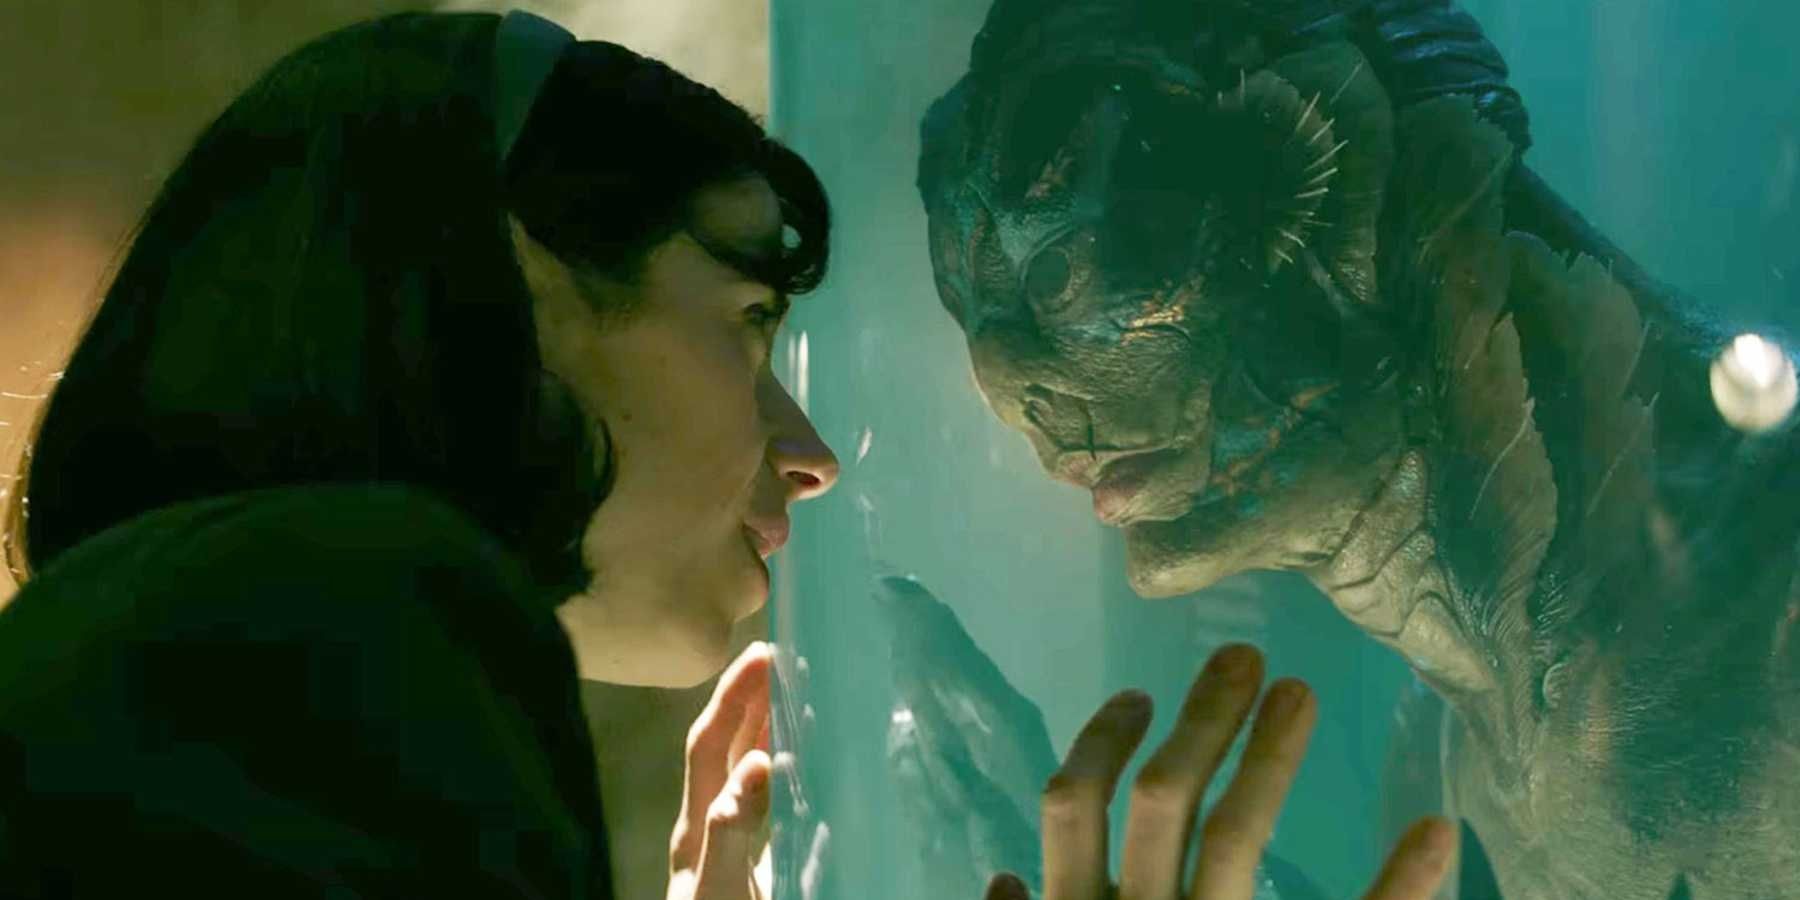 Elisa looking at the fish-man in The Shape of Water